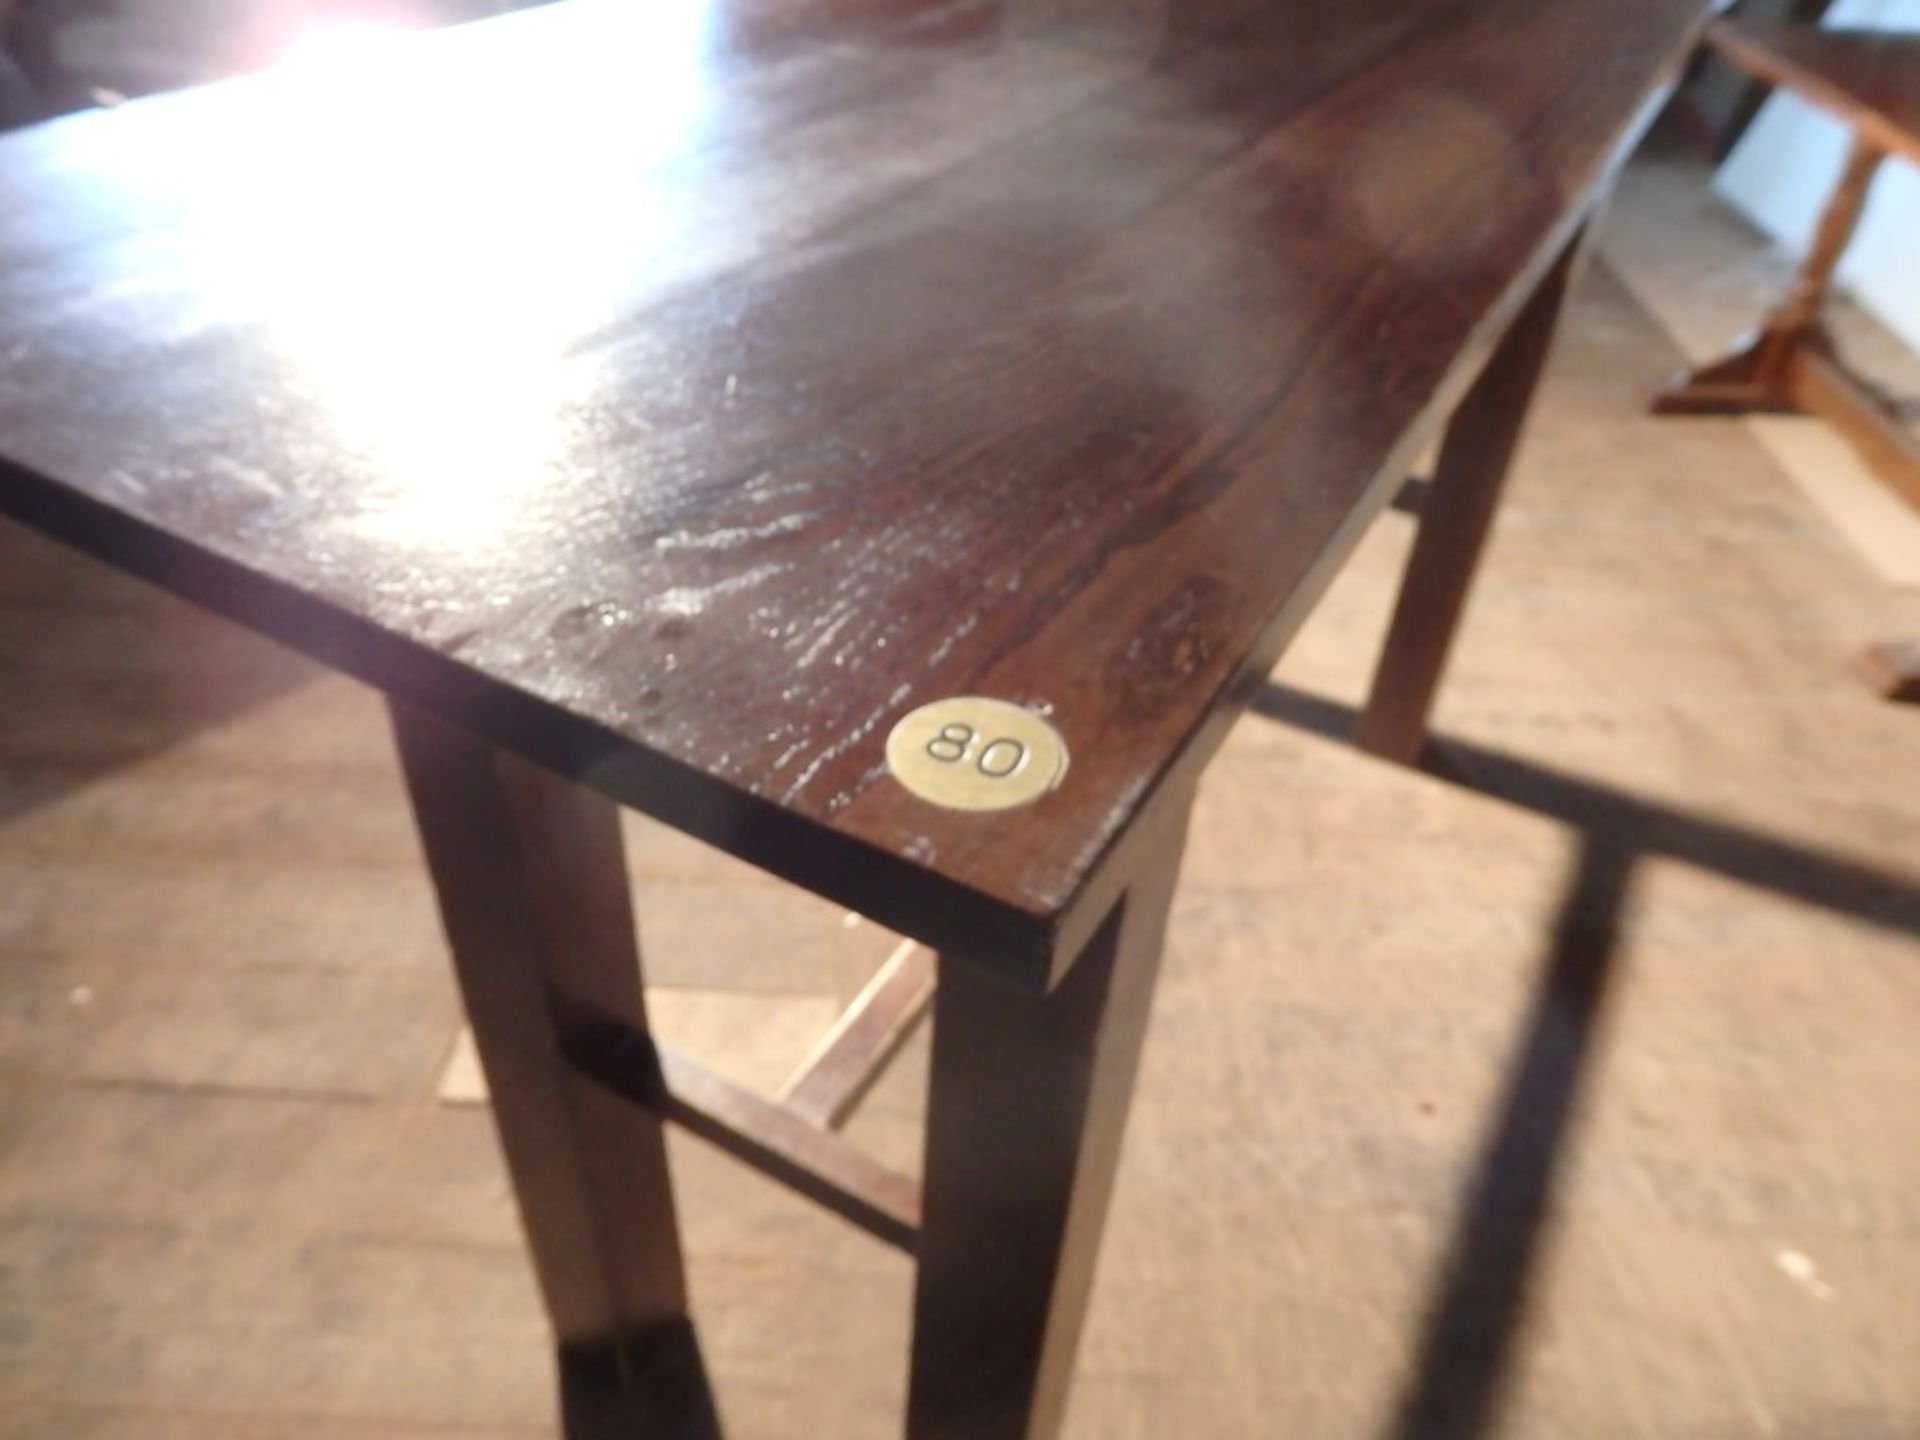 1 x Tall, Sturdy Rectangular Solid Wood Dining Table - Recently Taken From A Bar & Restaurant - Image 7 of 8